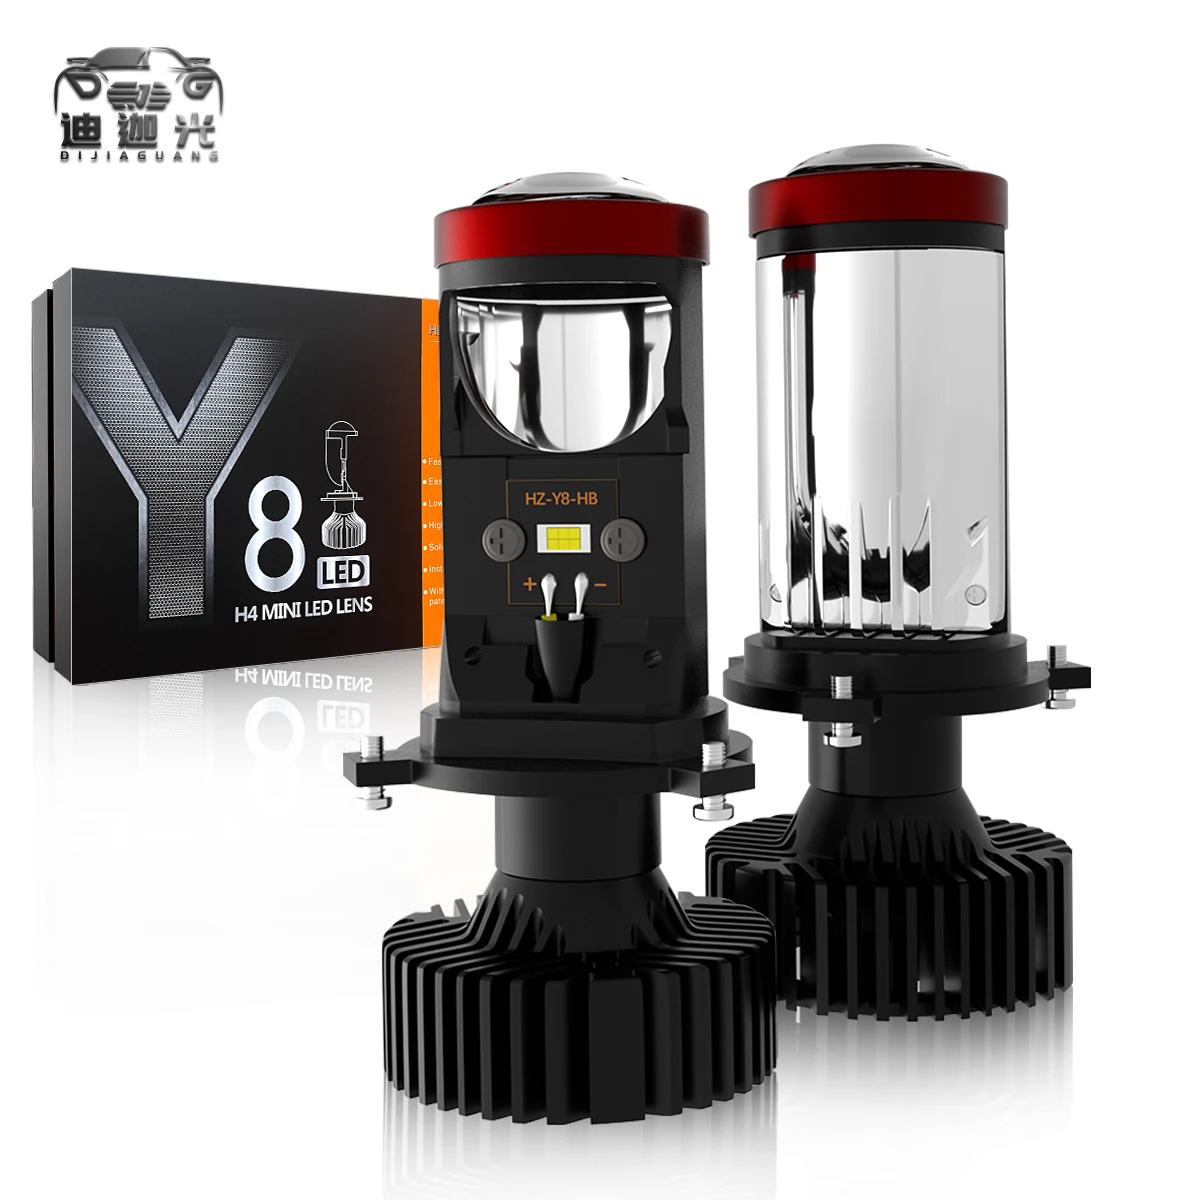 

Wholesale Y8 Mini Projector Lens 90W 18000Lm Canbus led bulbs High/Low Beam car Luces led Motorcycle light h4 Headlight